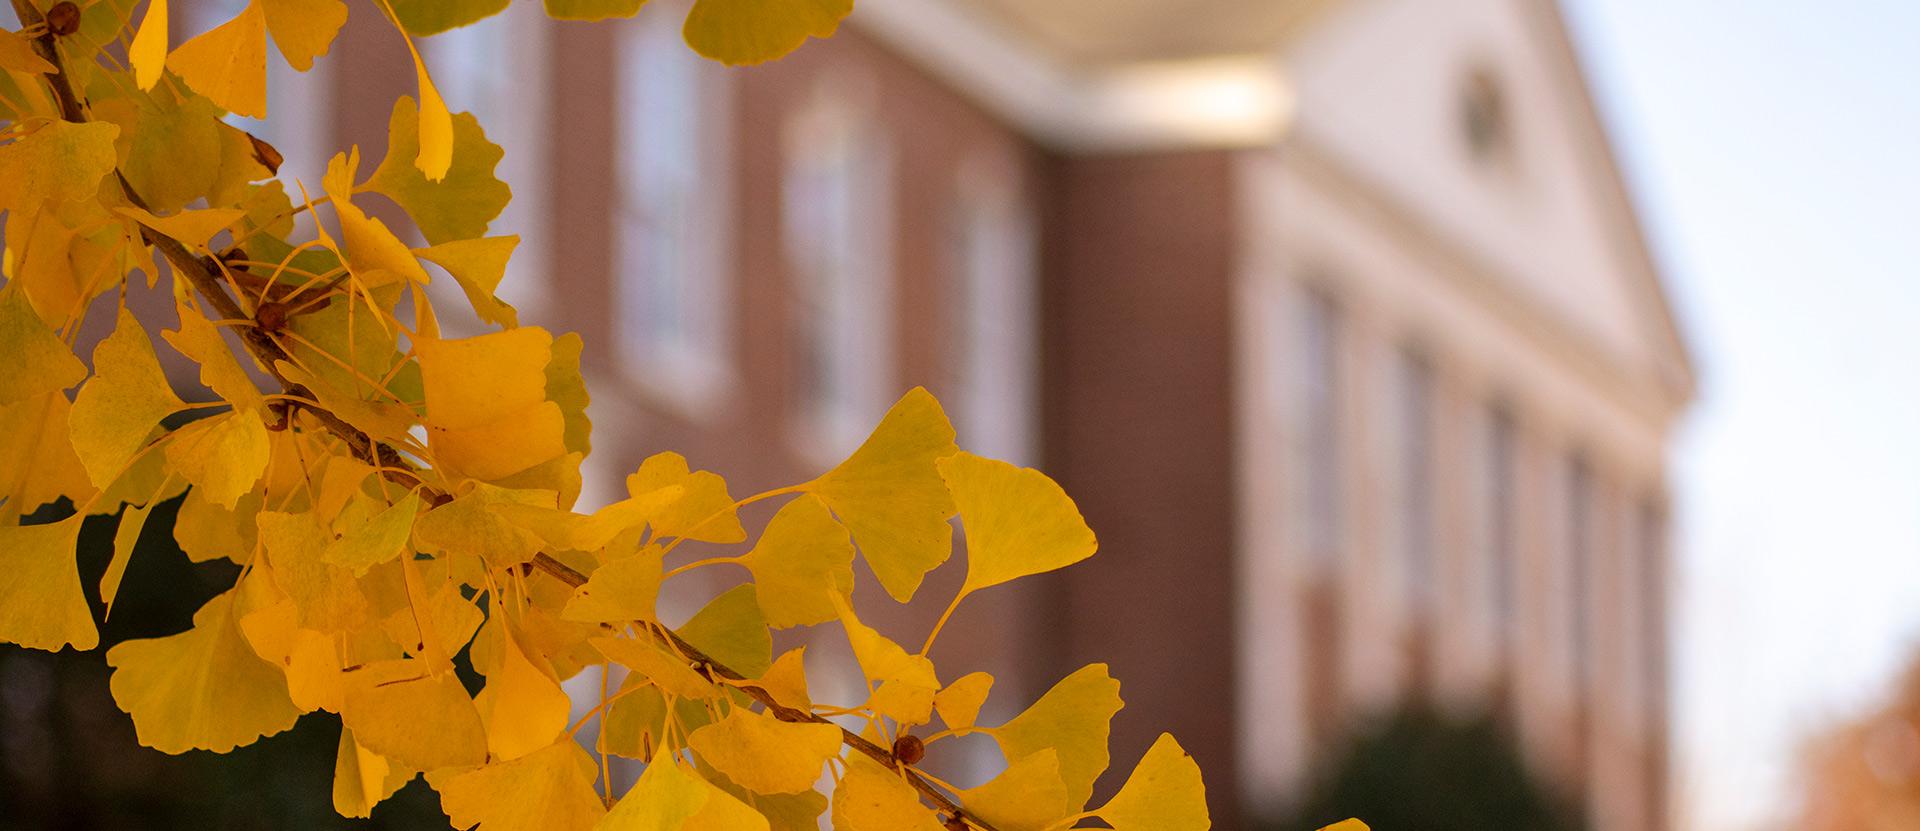 Campus building with ginkgo leaves in forground